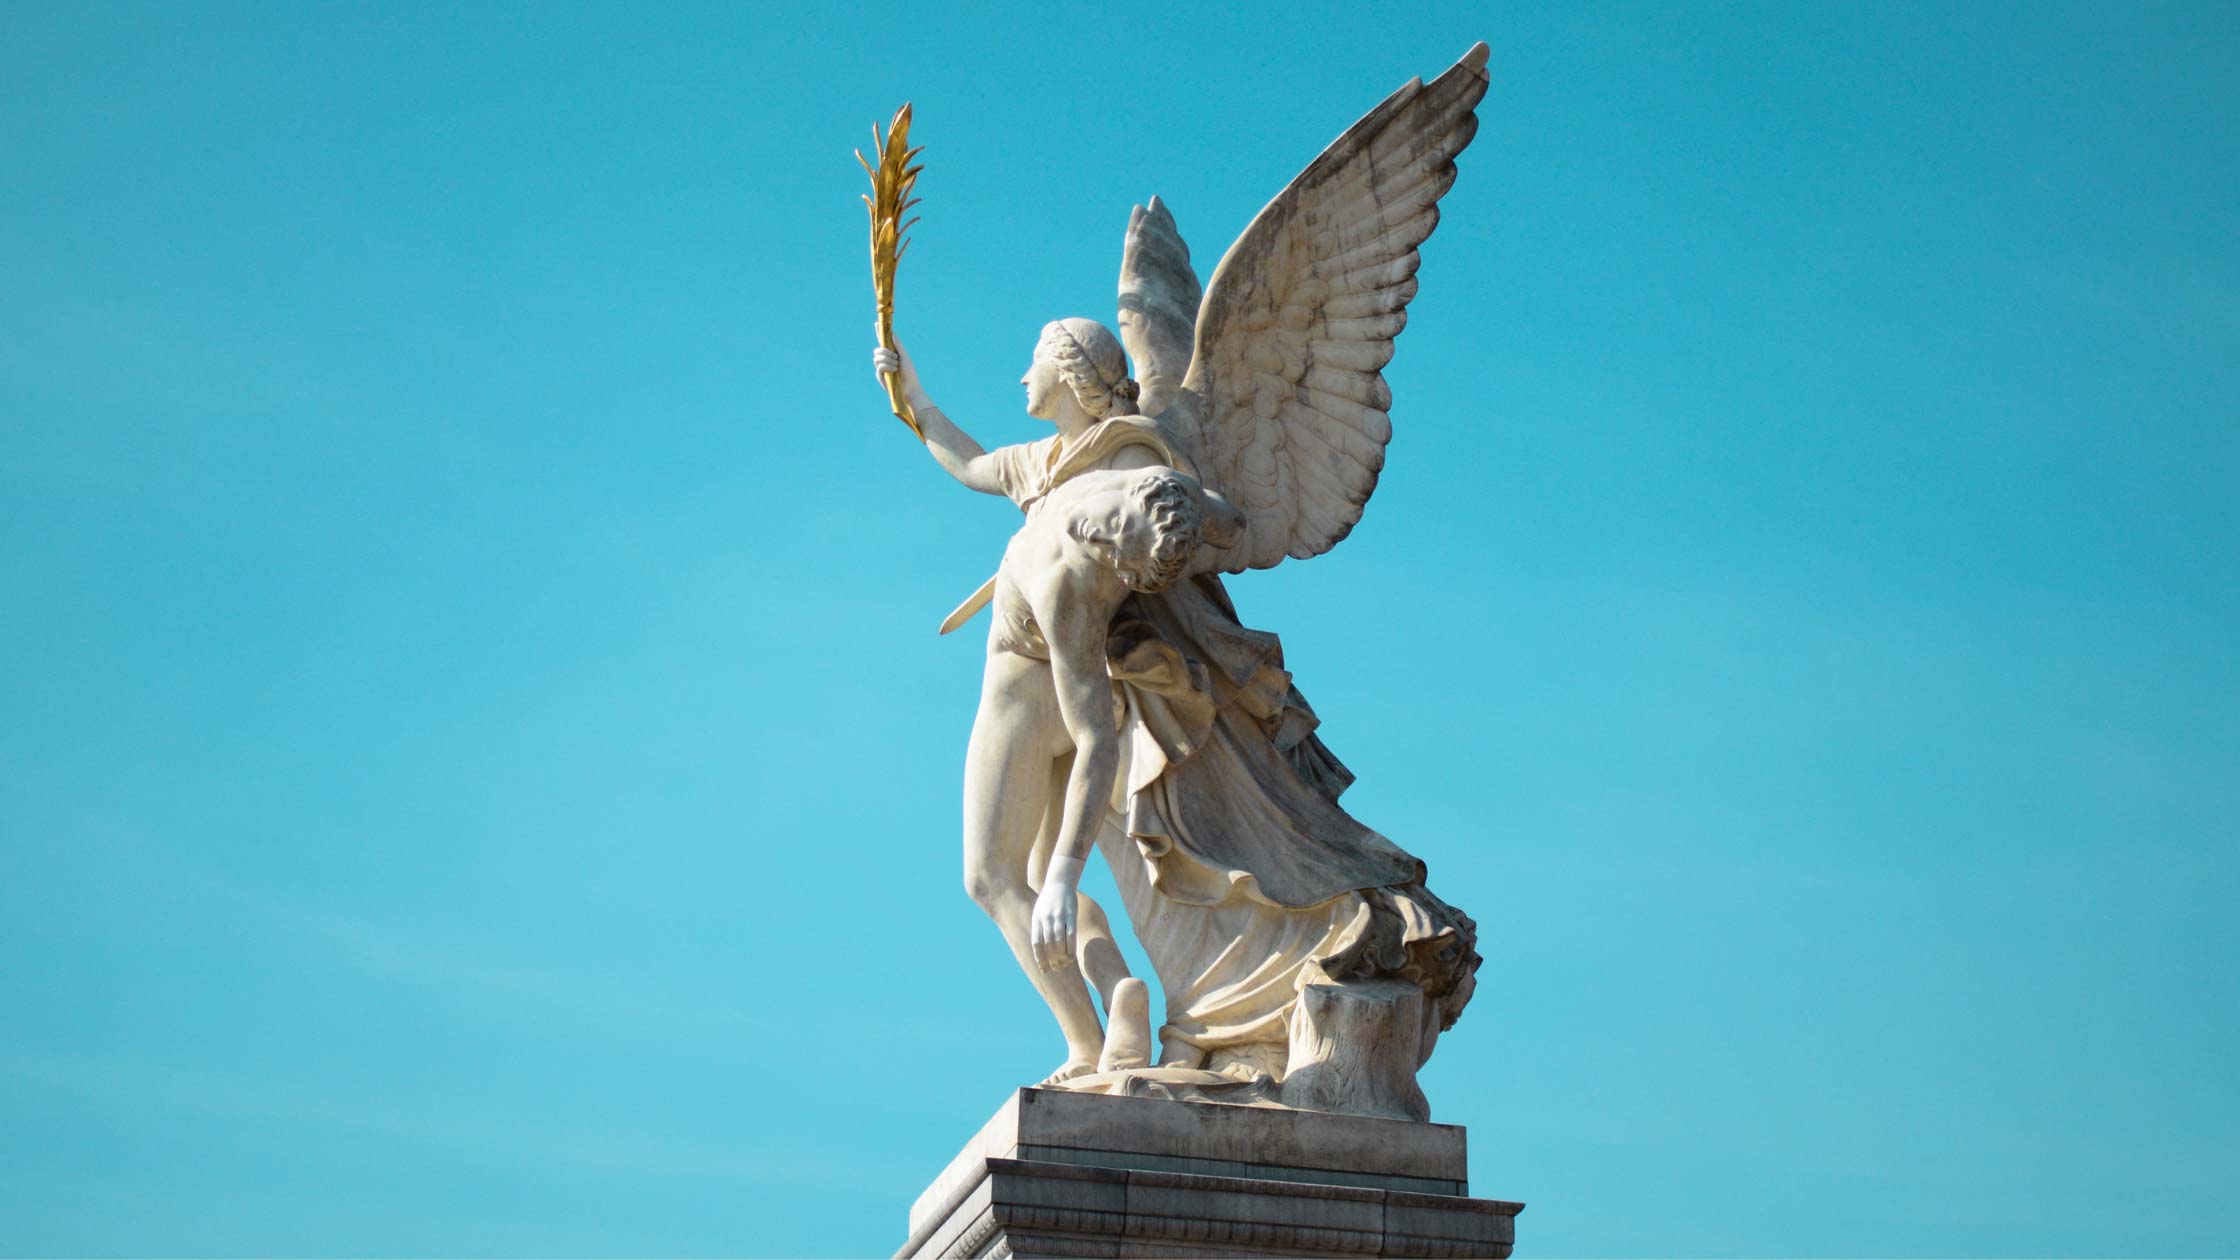 A winged angel statue in the sky with a blue background.